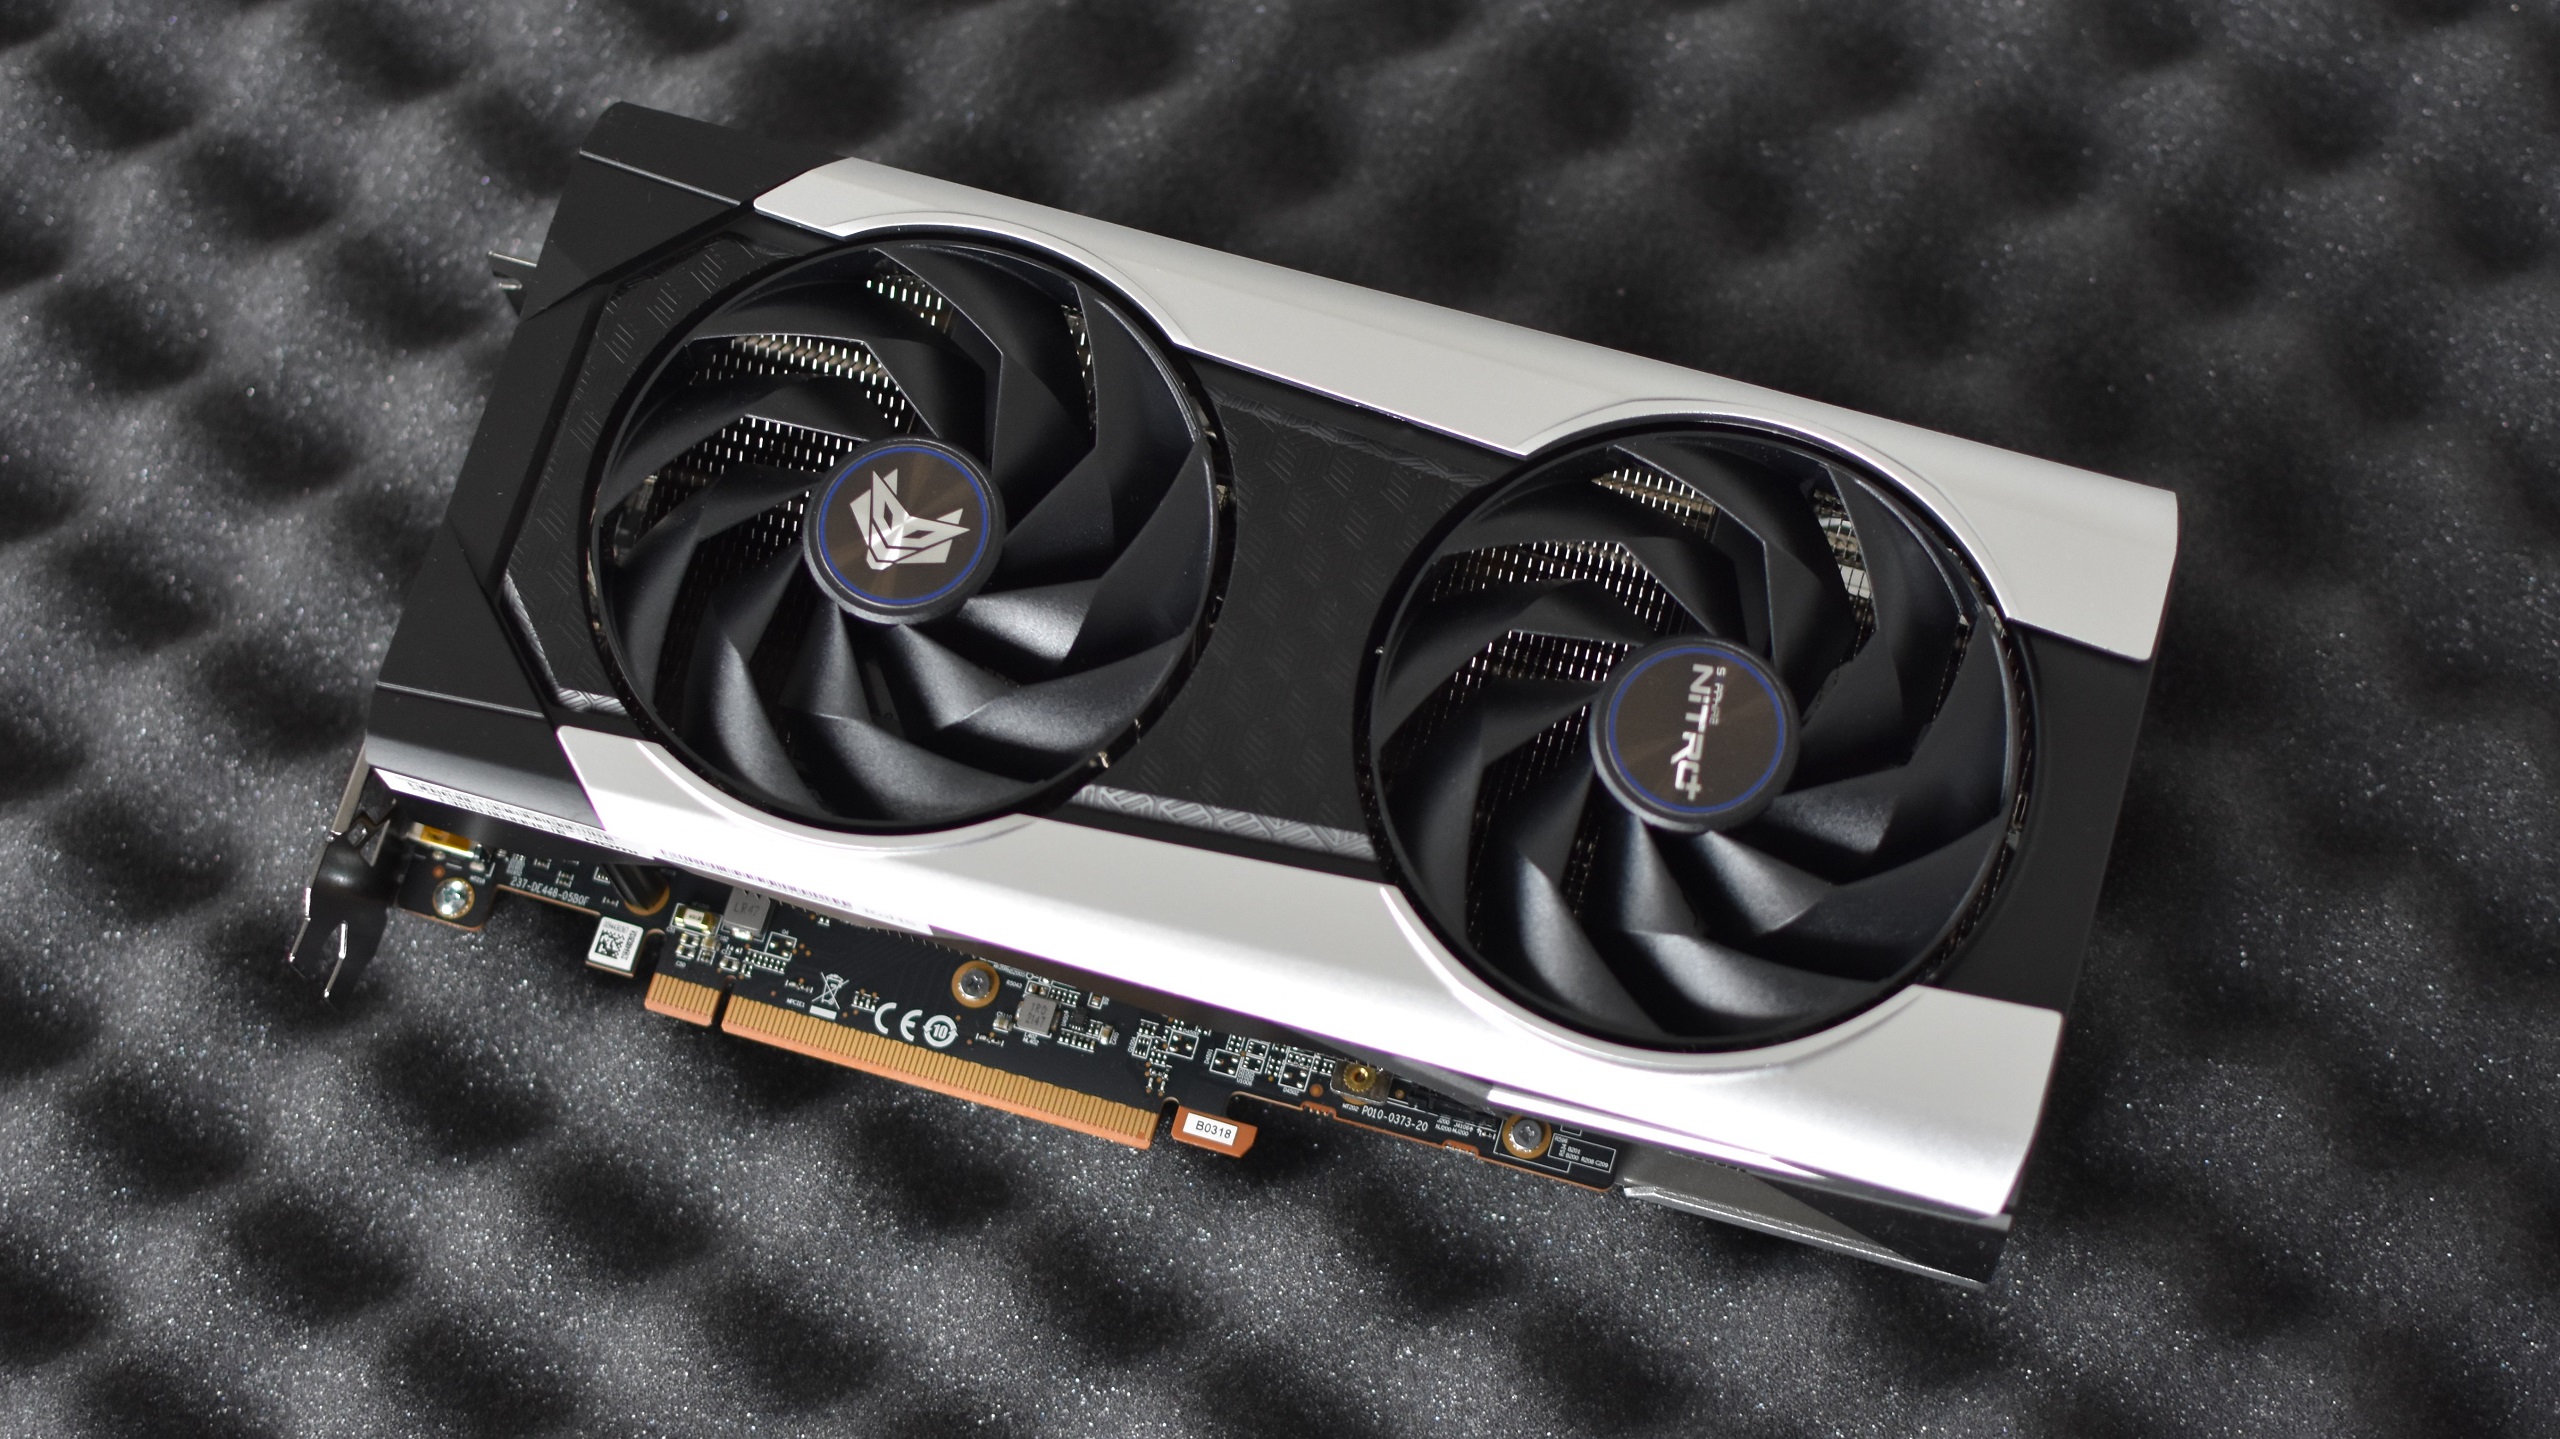 The Sapphire Nitro+ Radeon RX 6650 XT graphics card, cooler side up.